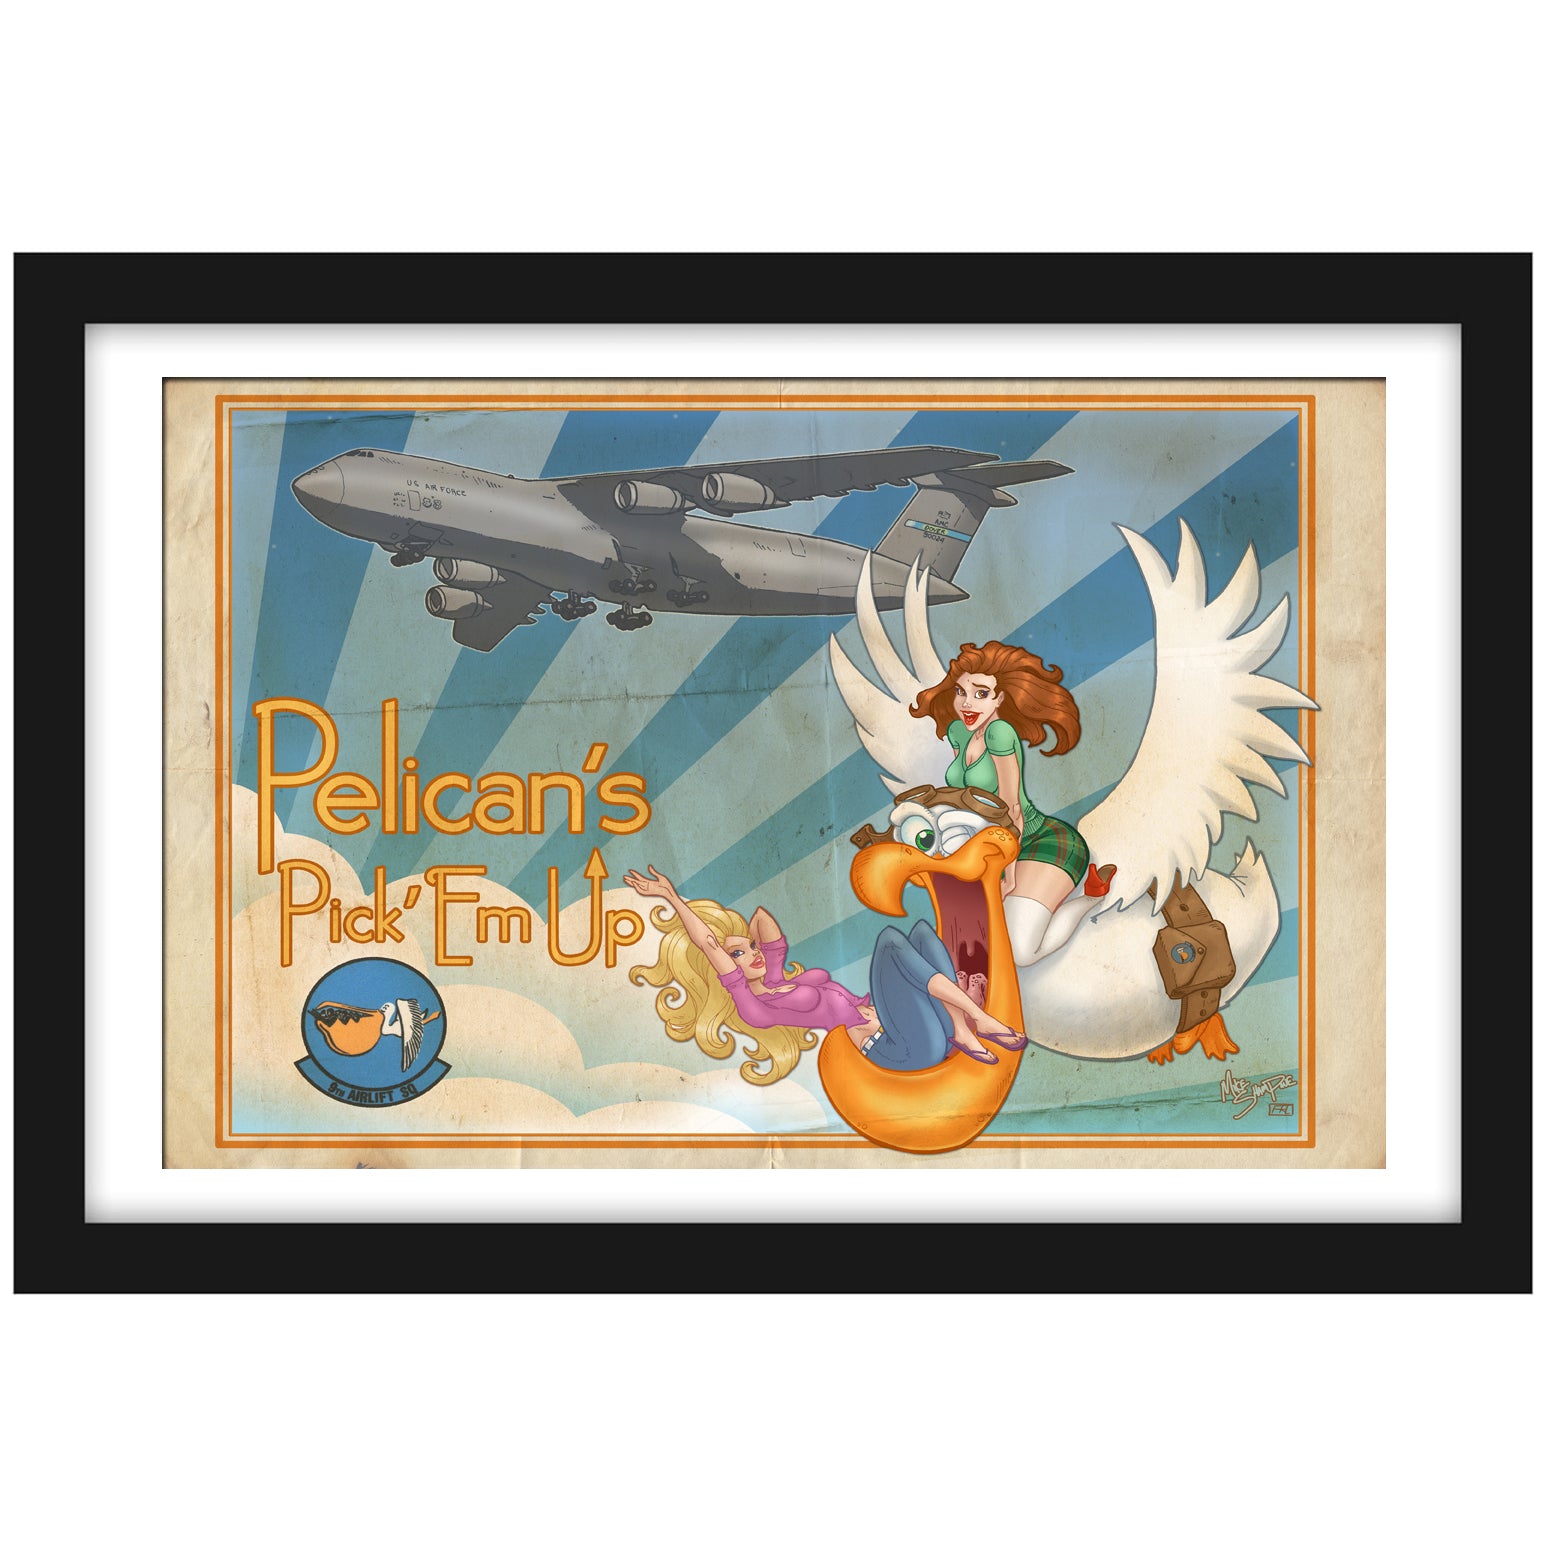 C-5 "Pelicans Pick 'Em Up"- Vintage Print Pinup & Airplane Art by Mike Shampine - Signed and Numbered